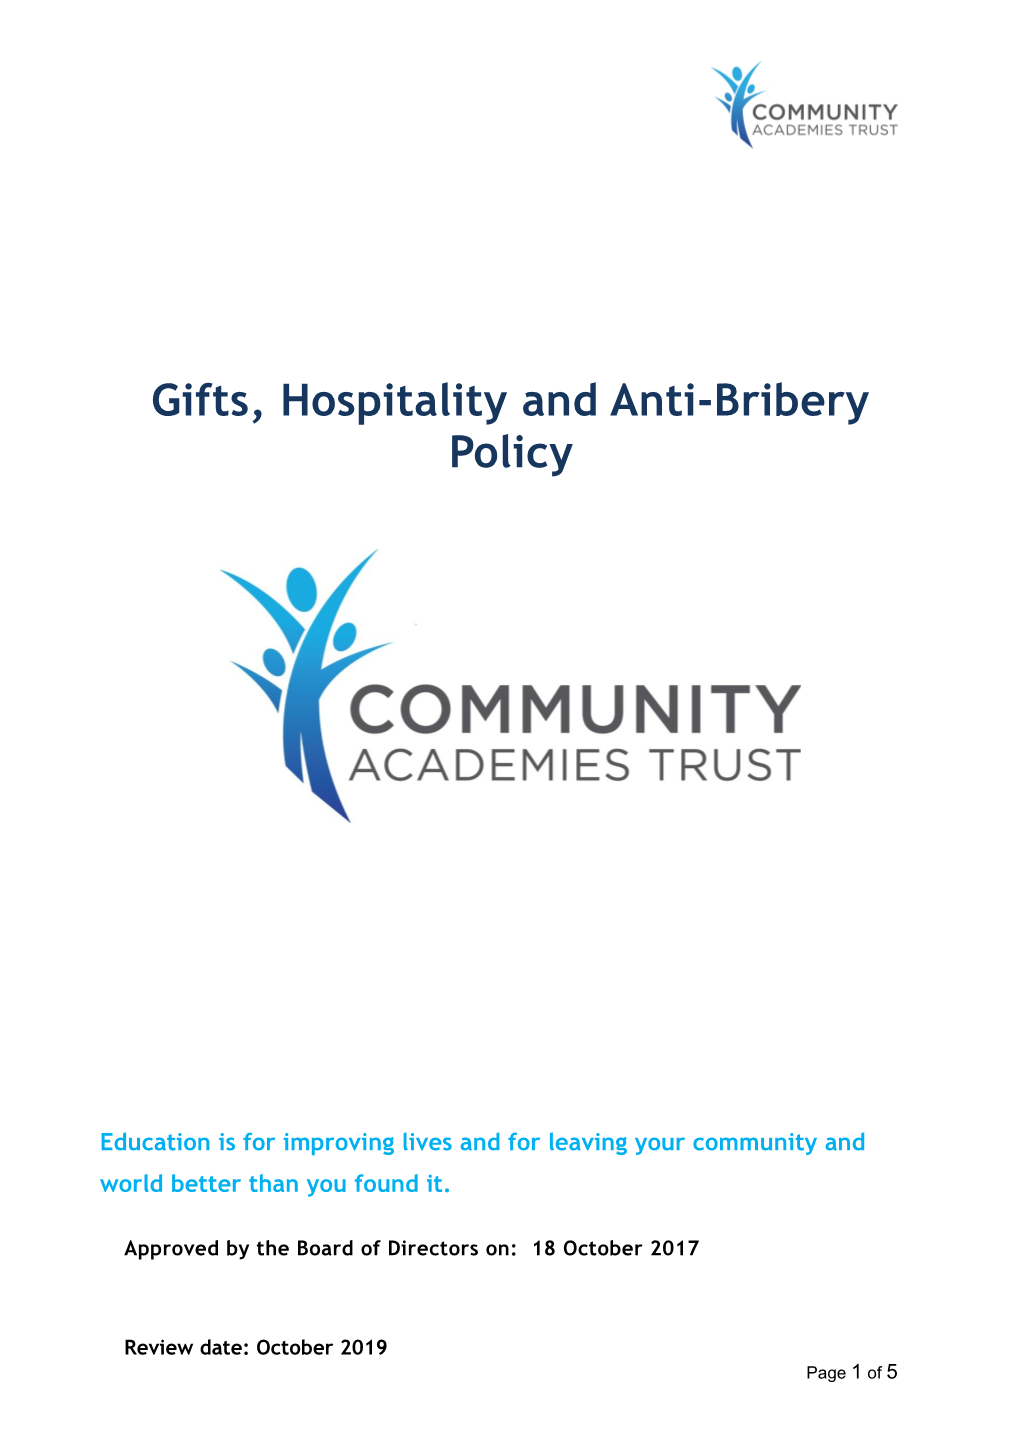 Gifts, Hospitality and Anti-Bribery Policy